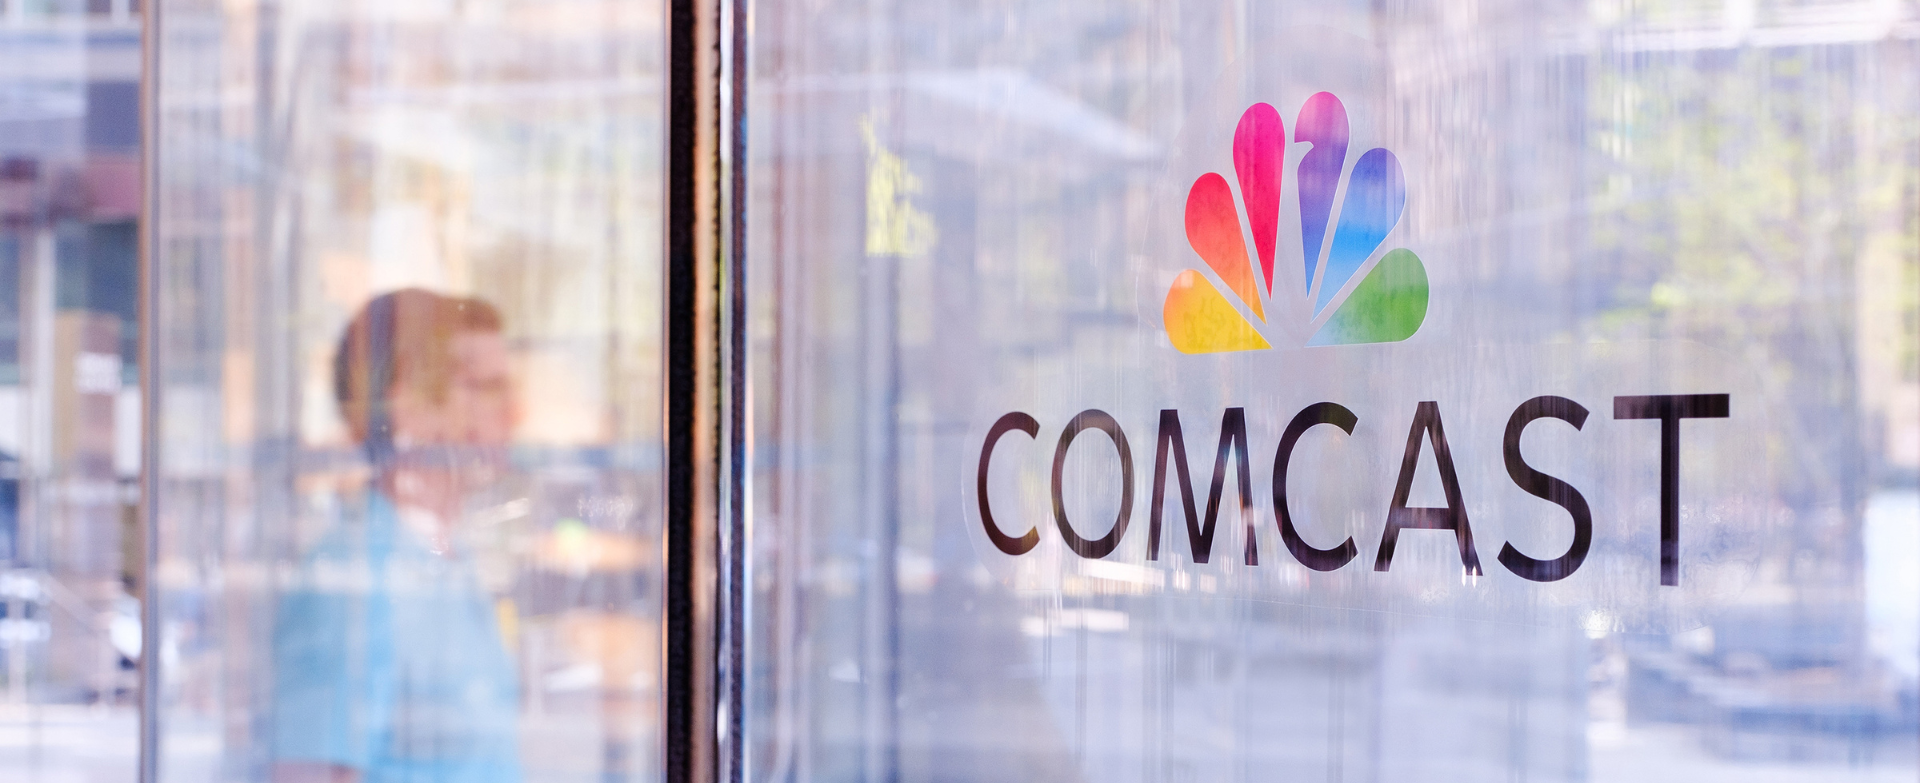 reflection of man in window with Comcast logo